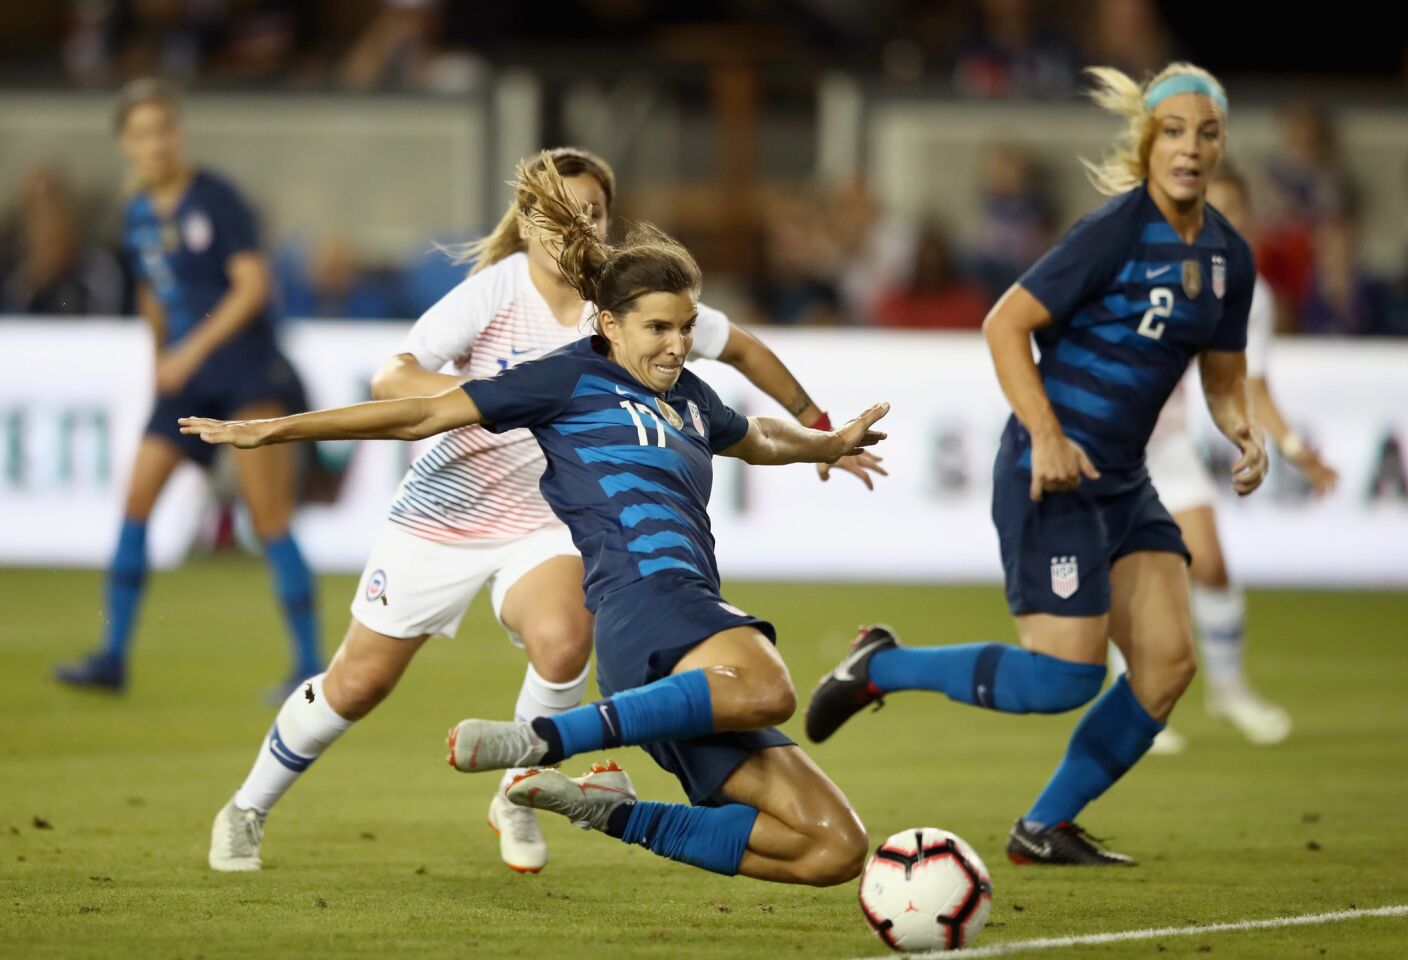 SAN JOSE, CA - SEPTEMBER 04: Tobin Heath of the United States scores a goal against Chile during their match at Avaya Stadium on September 4, 2018 in San Jose, California. (Photo by Ezra Shaw/Getty Images) ** OUTS - ELSENT, FPG, CM - OUTS * NM, PH, VA if sourced by CT, LA or MoD **